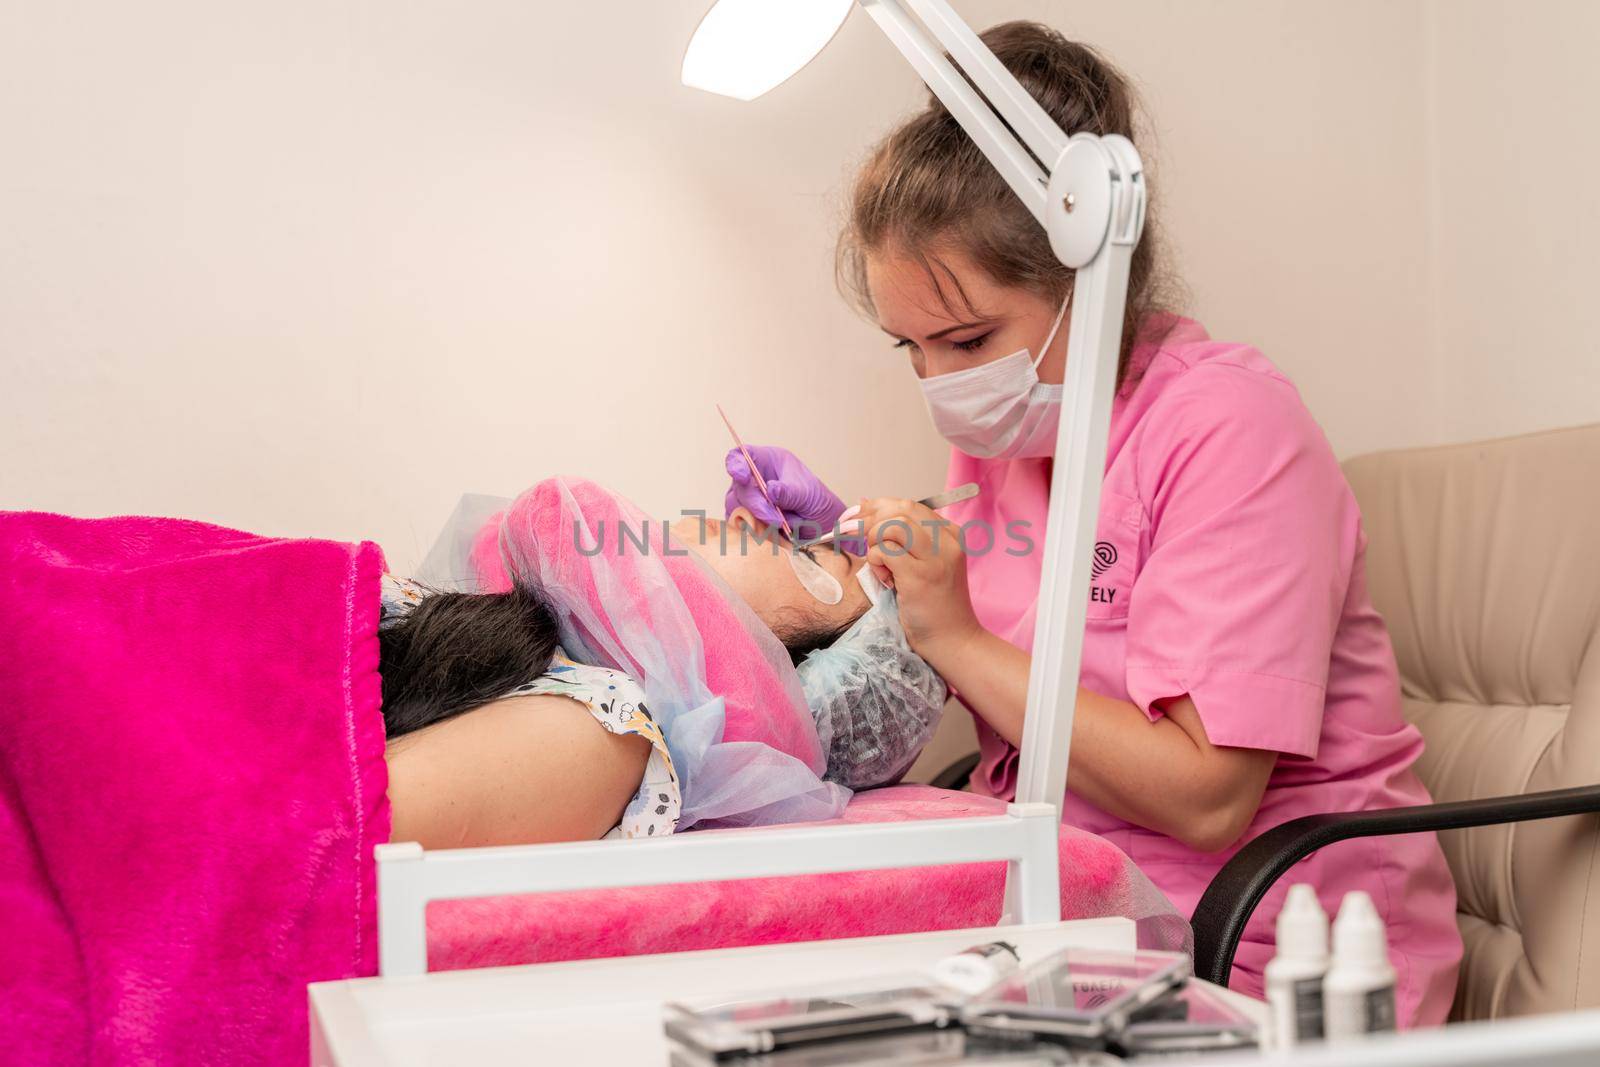 Master lashmaker, diligently extends eyelashes to the client, on the couch, in the beauty salon. A beauty master, a girl of 30 years old, European appearance, at work, in a bright room.